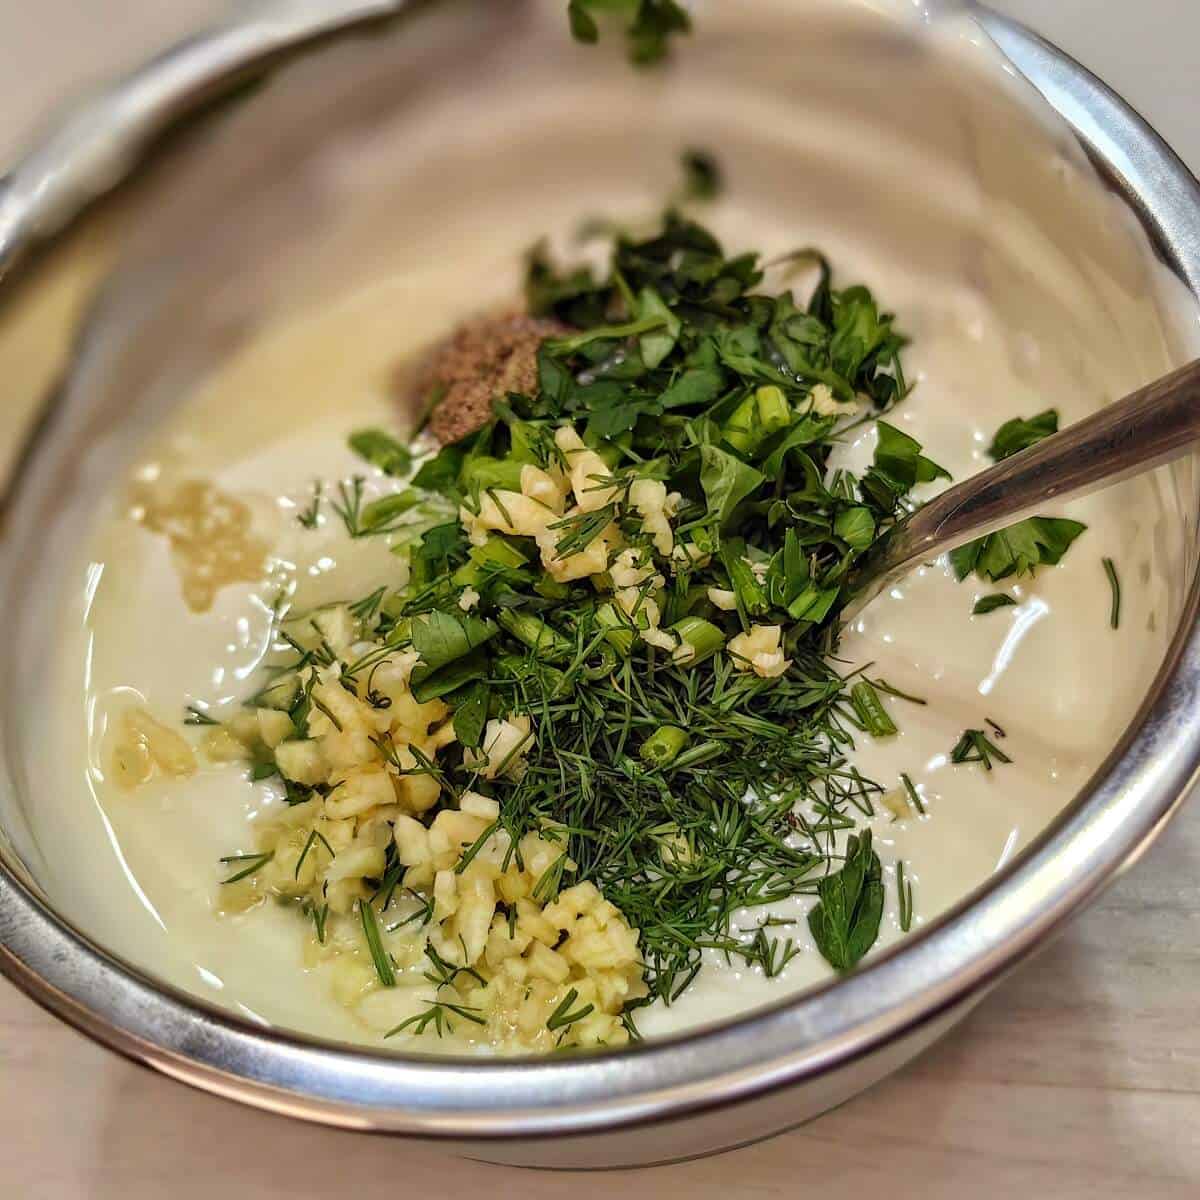 mayonnaise with herbs and spices in a mixing bowl